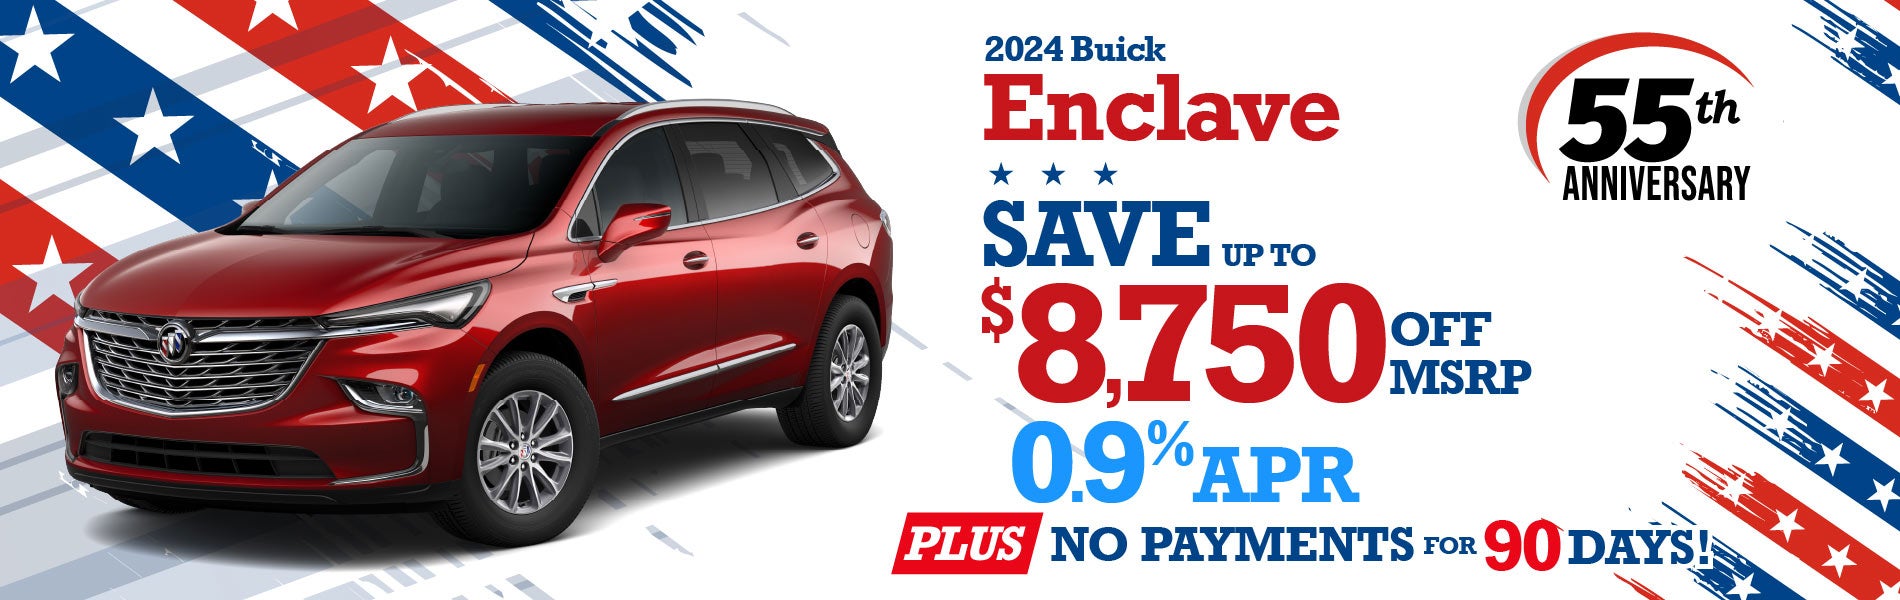 2024 Buick Enclave - SAVE up to $8750 or 0.9% APR